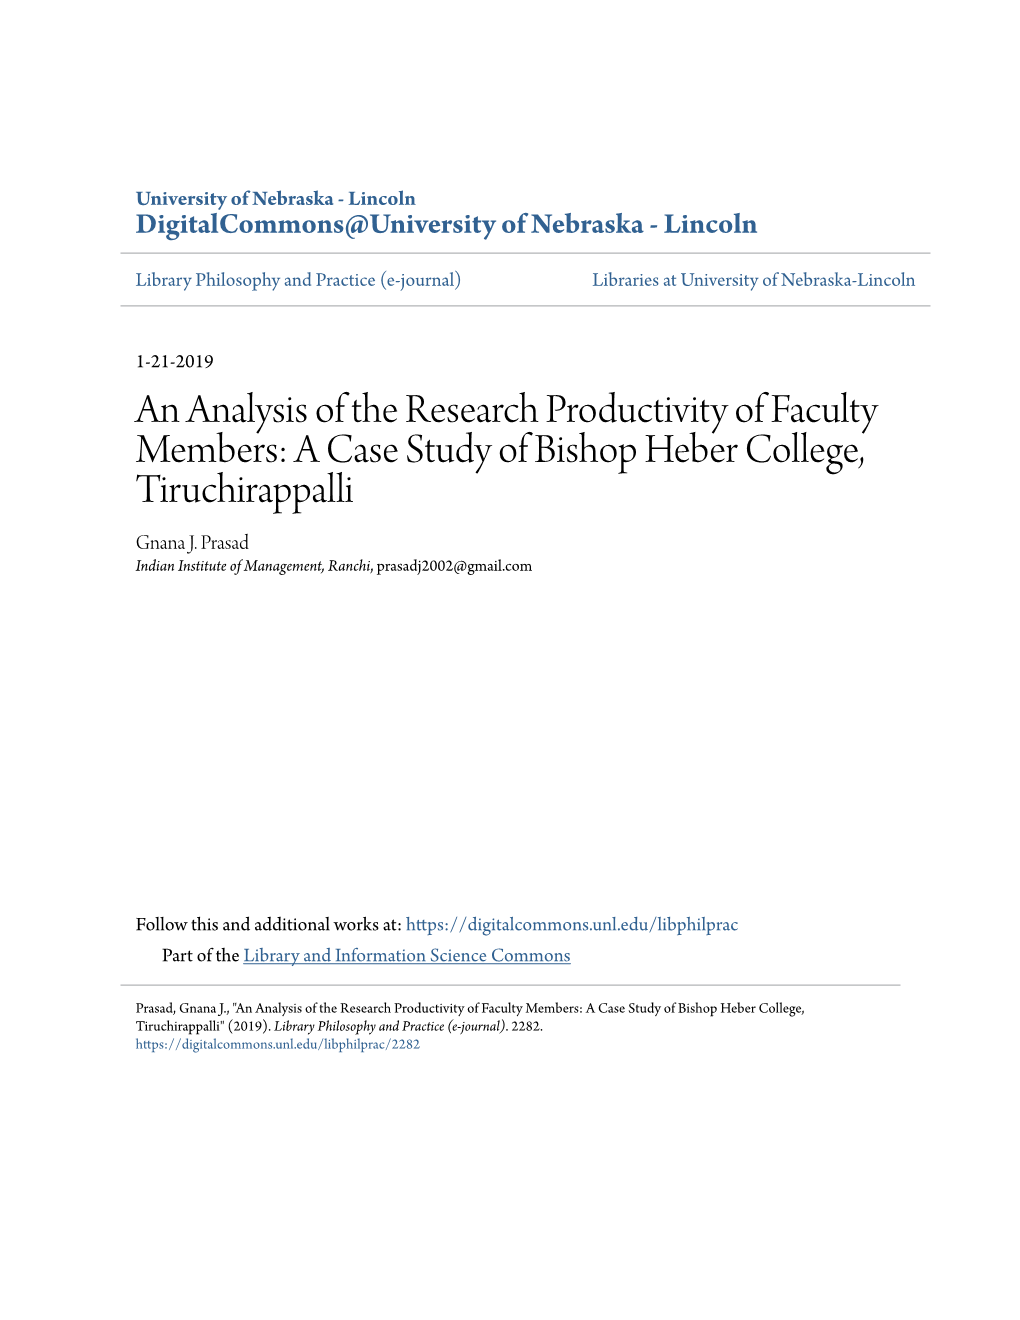 An Analysis of the Research Productivity of Faculty Members: a Case Study of Bishop Heber College, Tiruchirappalli Gnana J